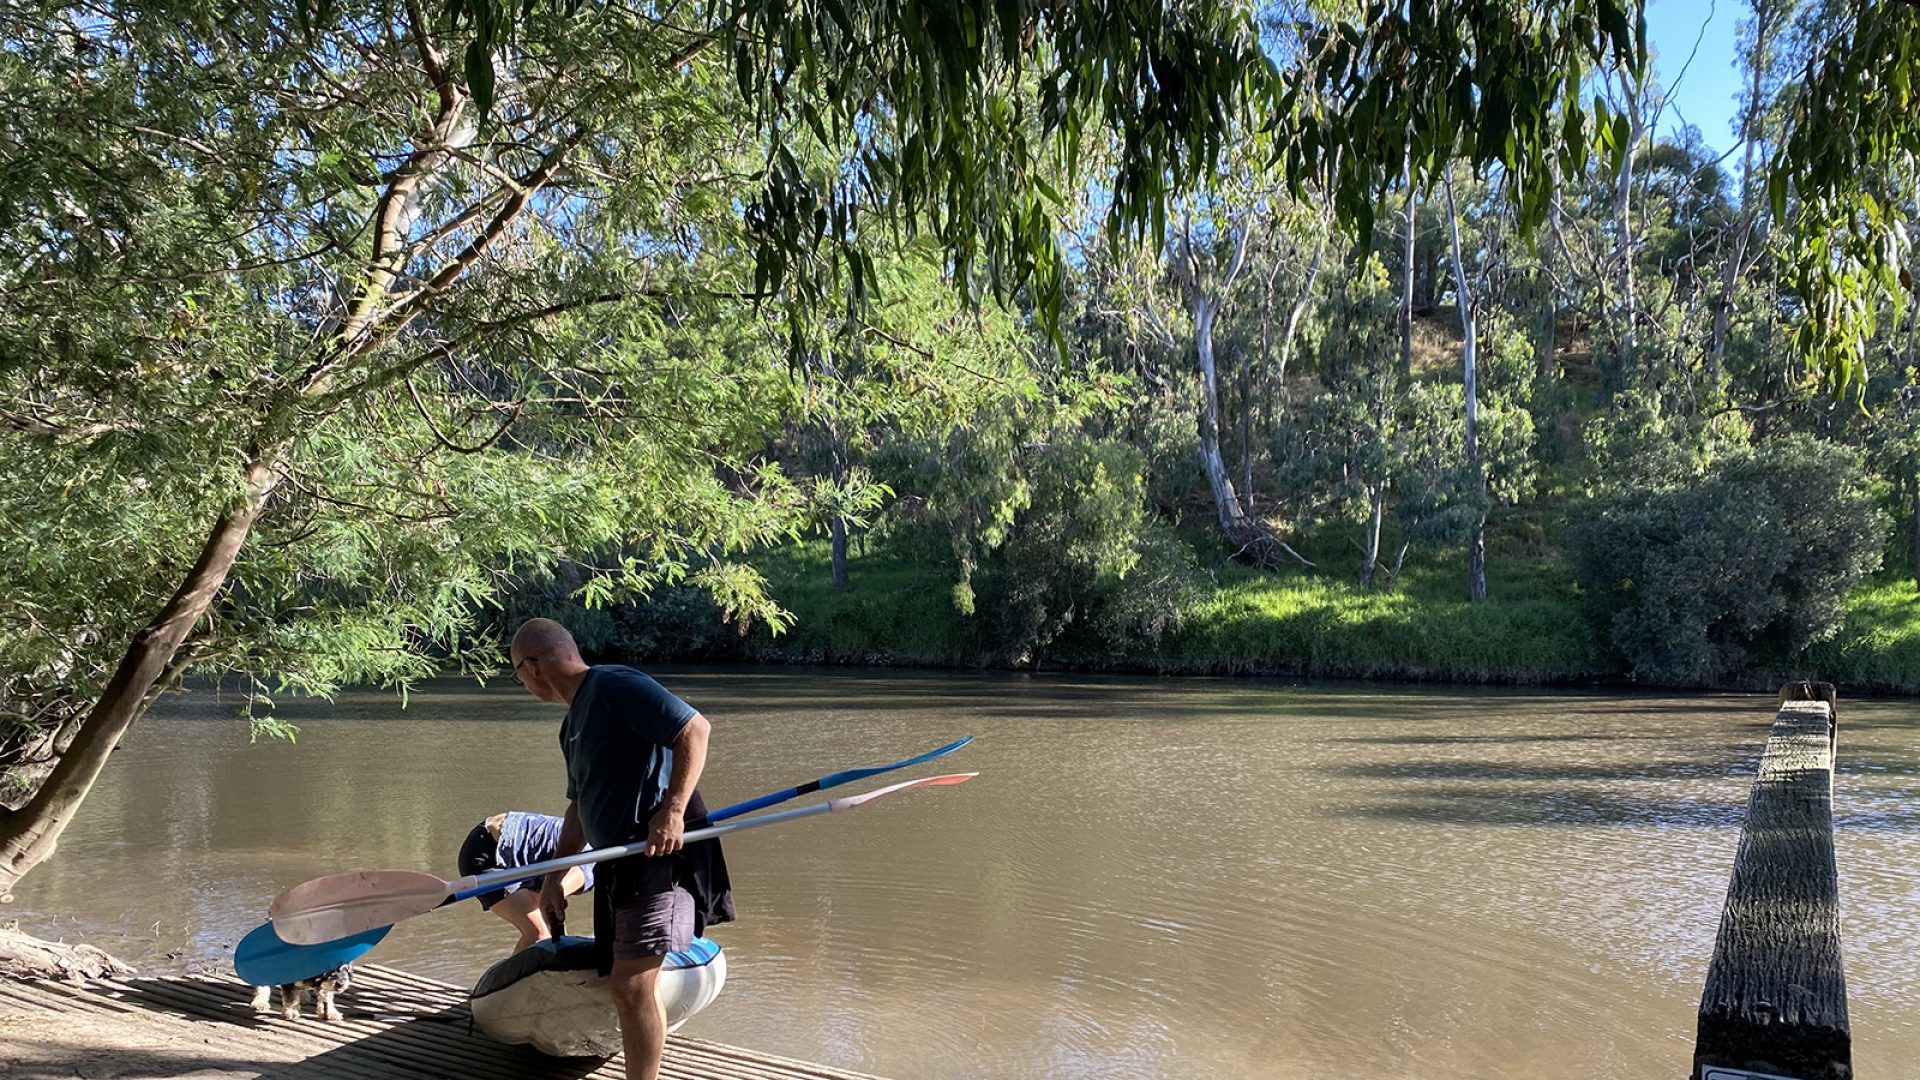 A person in a dark t-shirt and cap lifts the front of a kayak out of a river. They hold a paddle in their left hand while another person bends down to lift up the back end of the kayaki